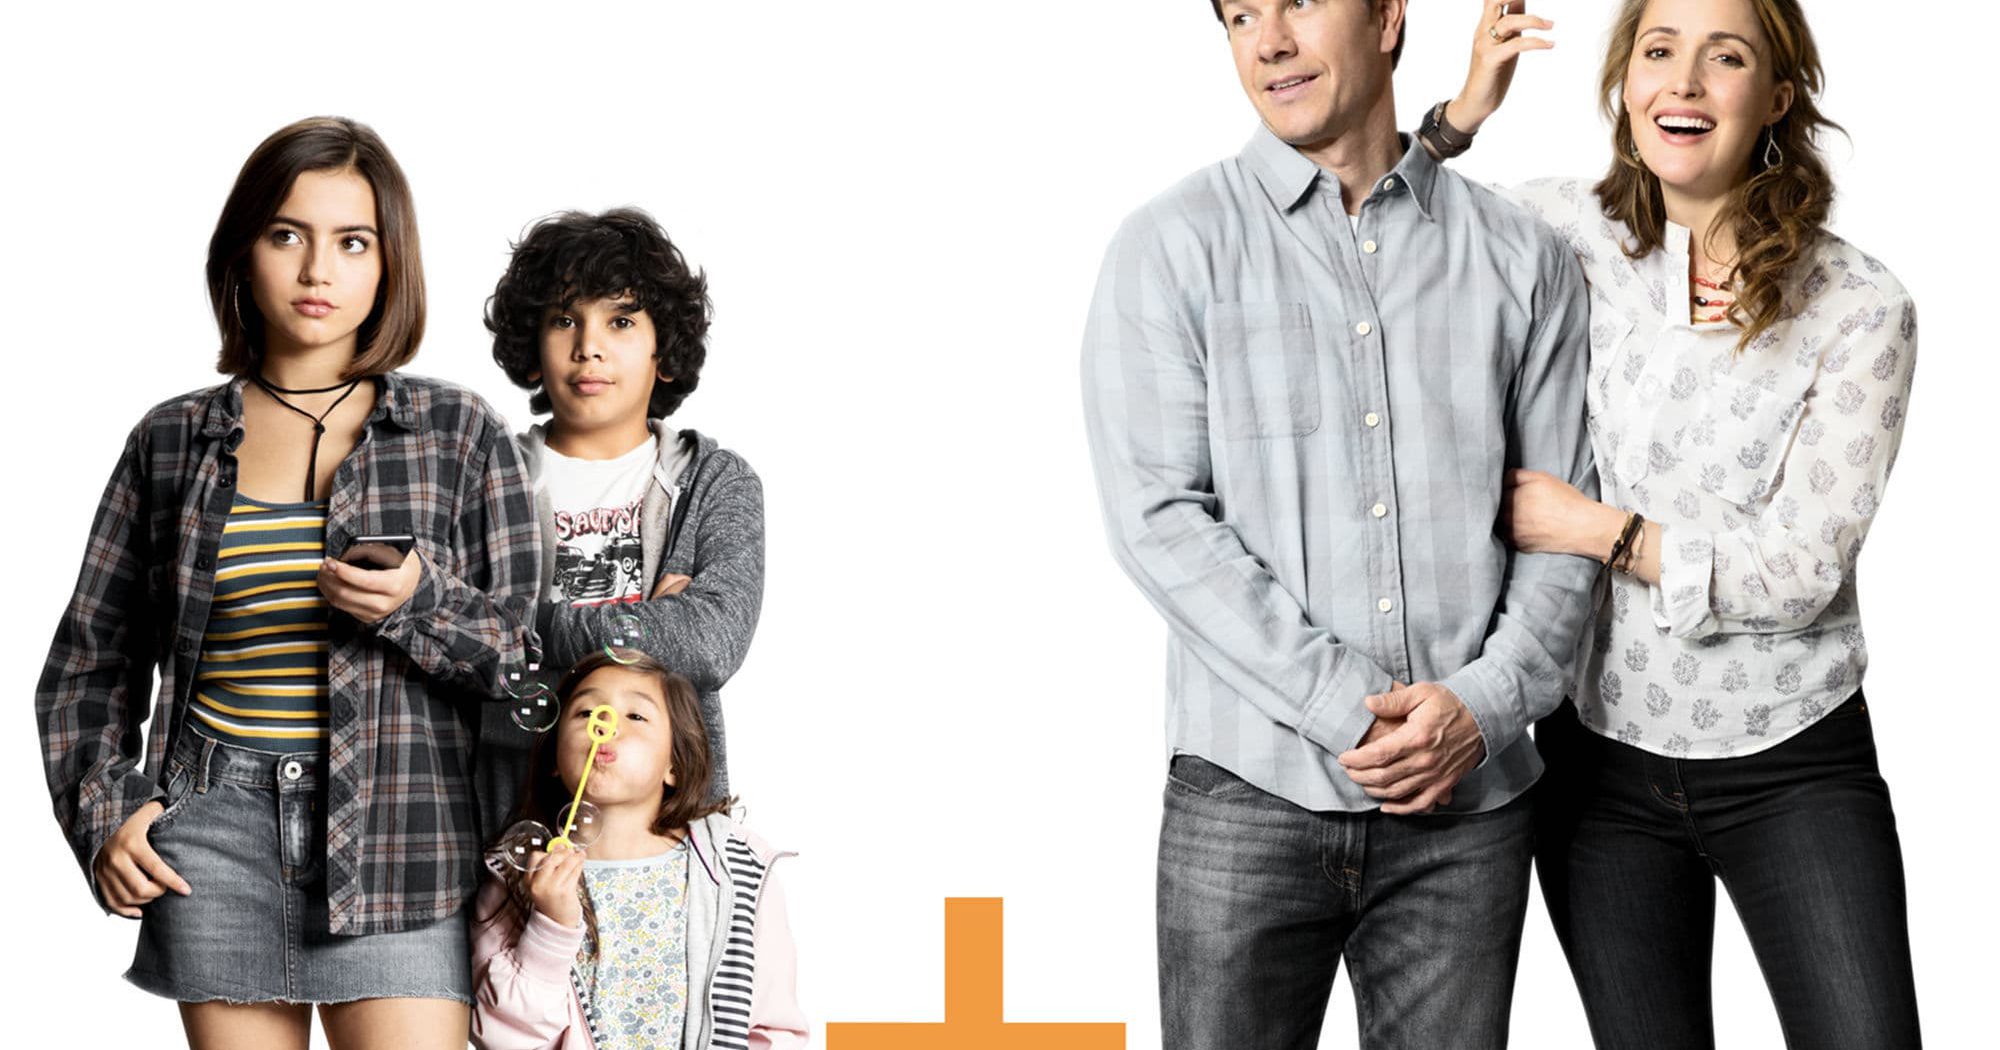 Poster for the movie "Instant Family"